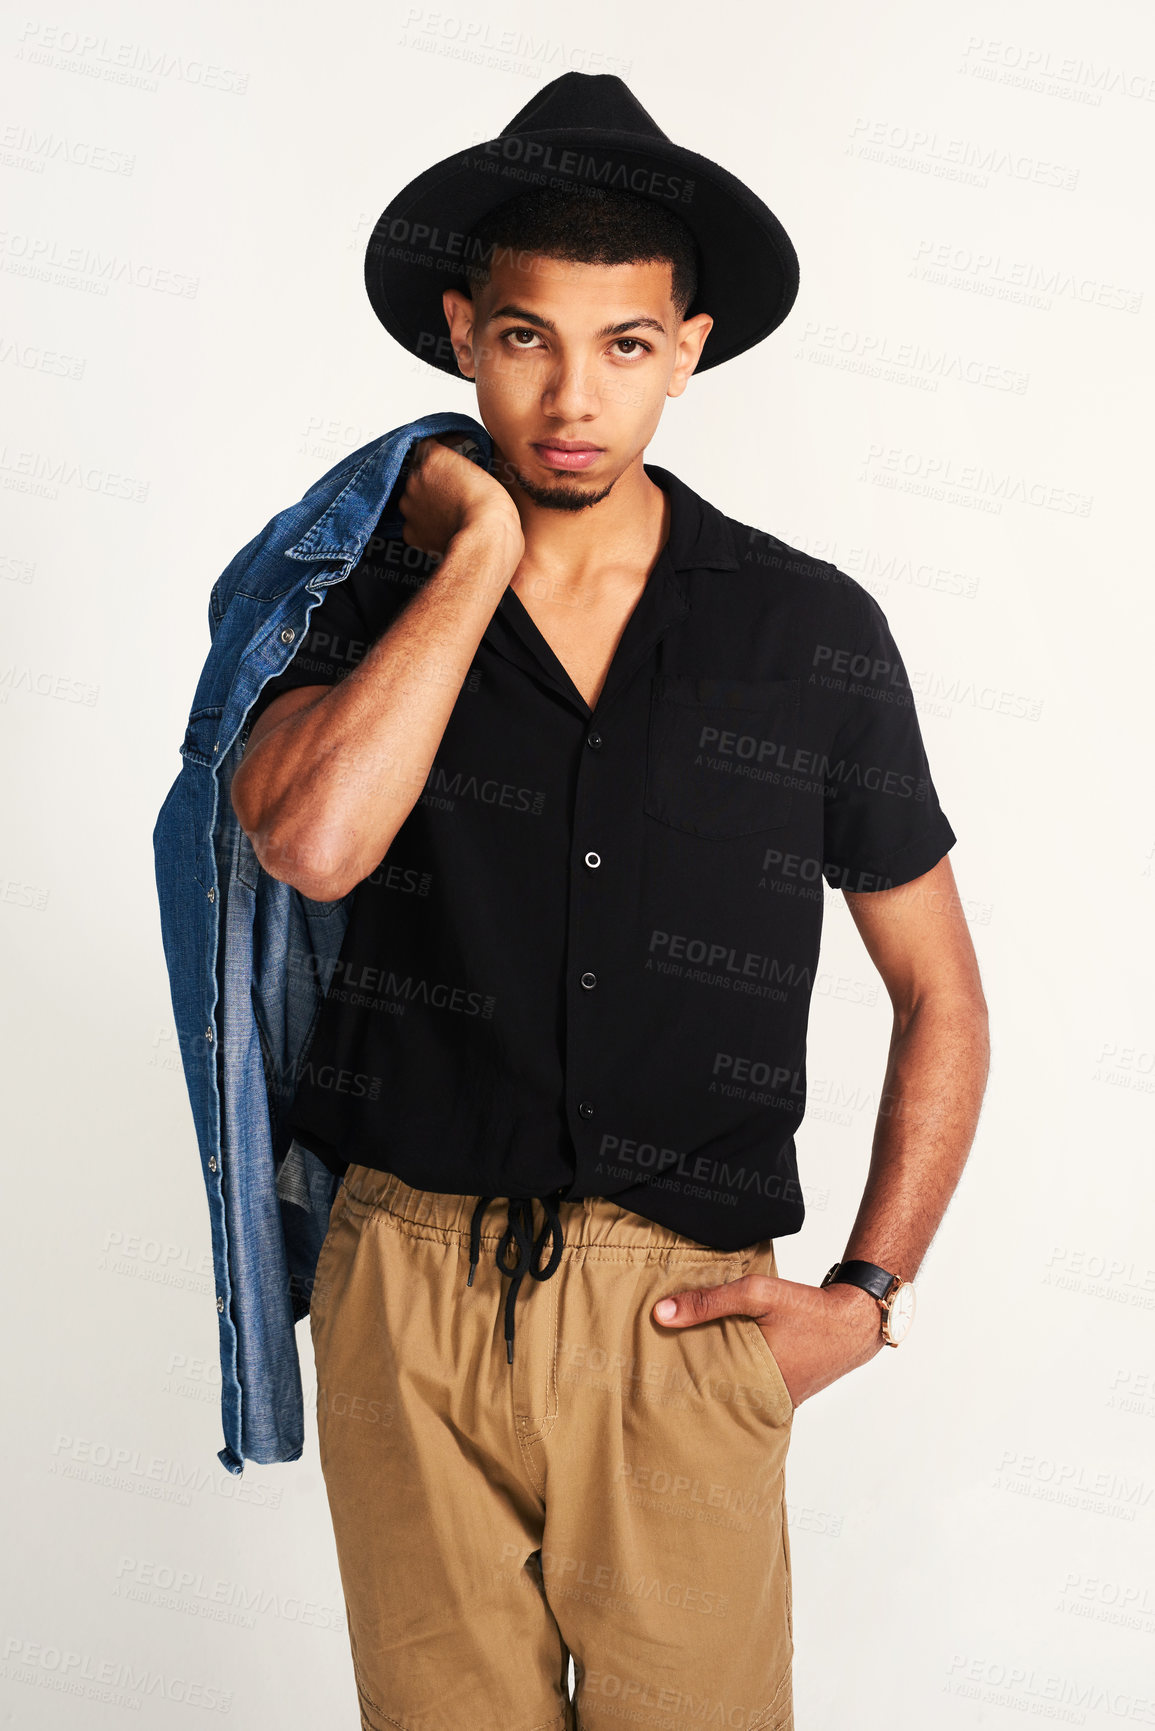 Buy stock photo Portrait of a handsome young man wering a hat and holding a jacket while posing against a grey background